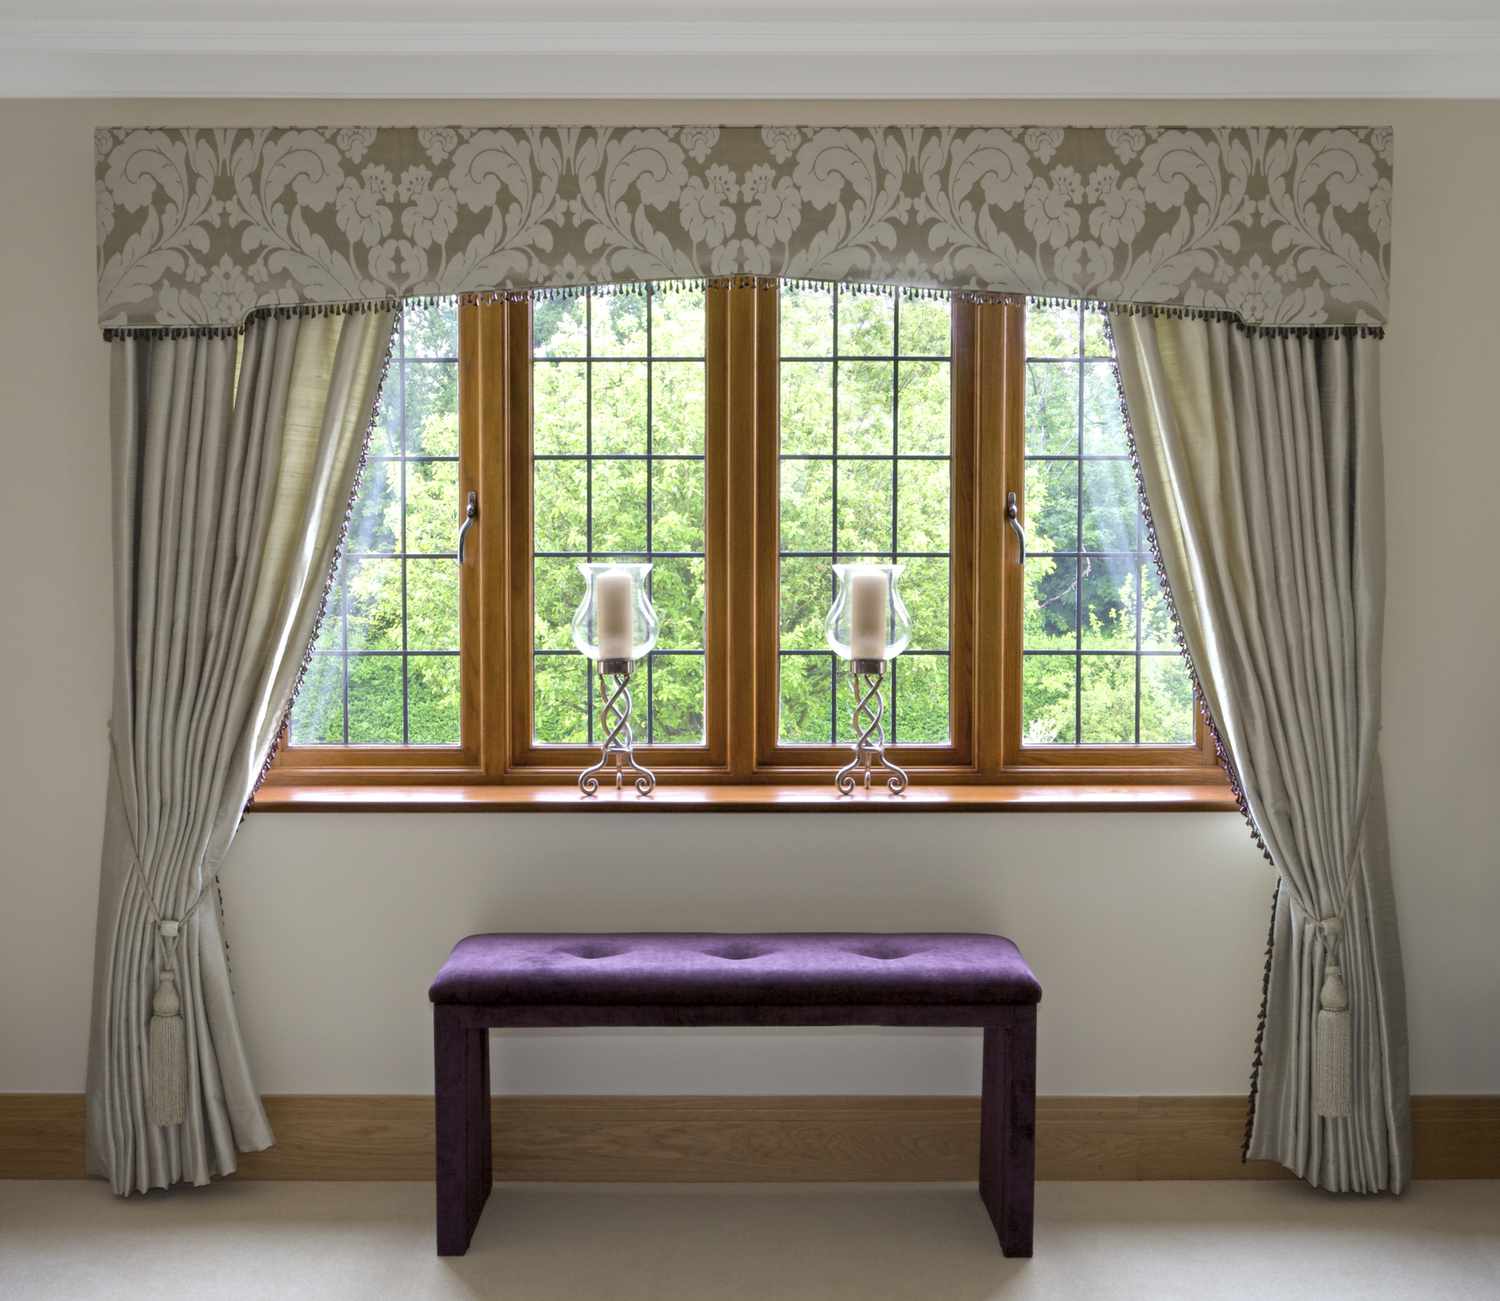 Cornice vs Valance: What's the Difference?